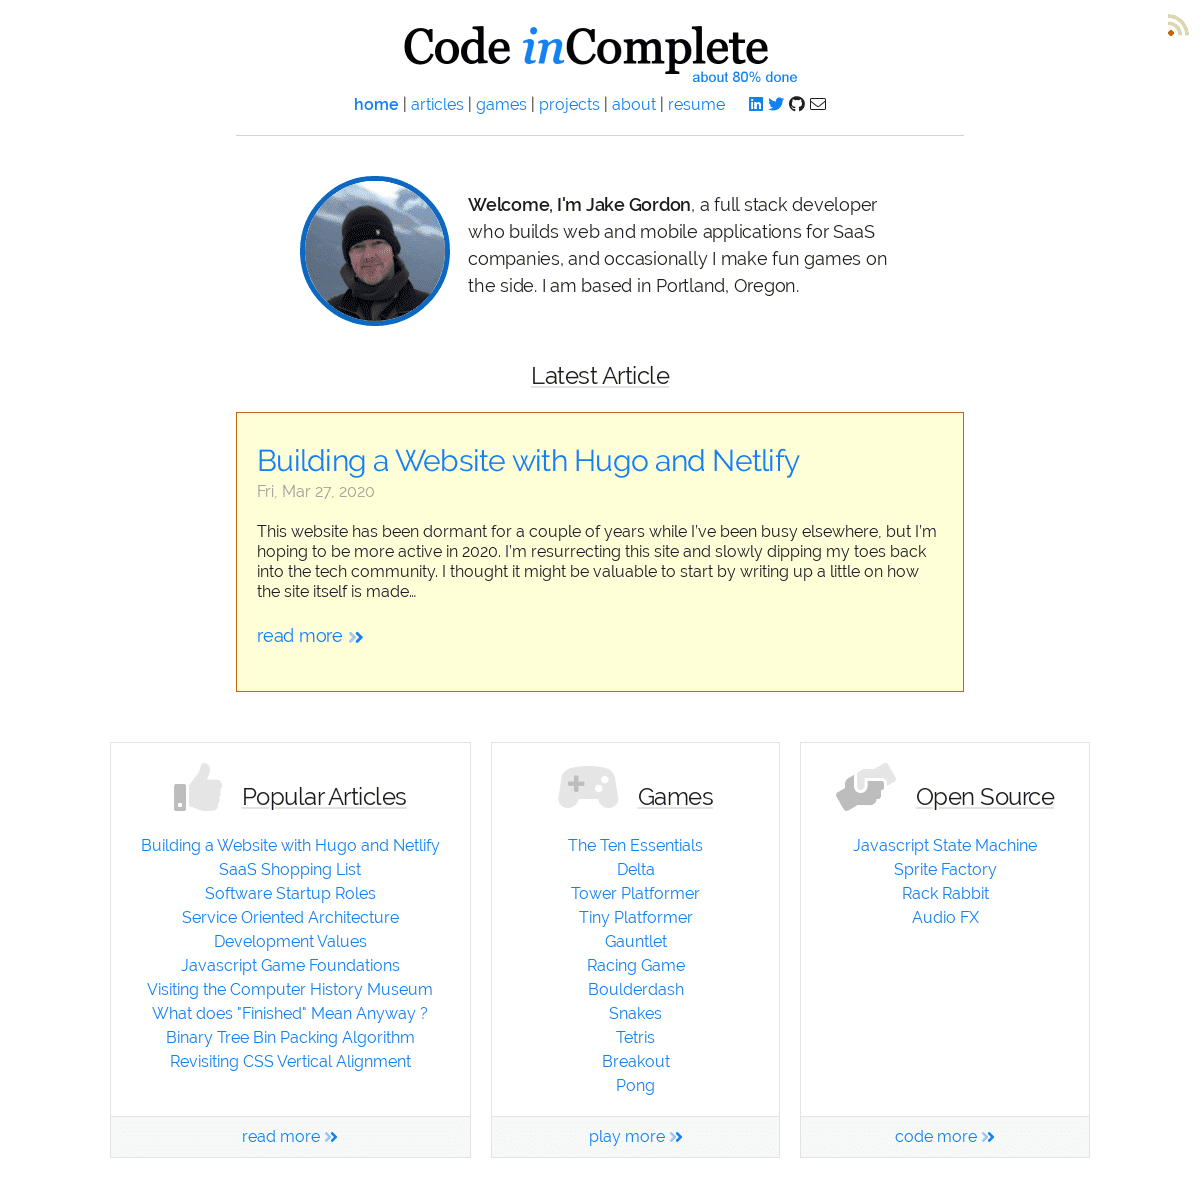 A complete backup of codeincomplete.com